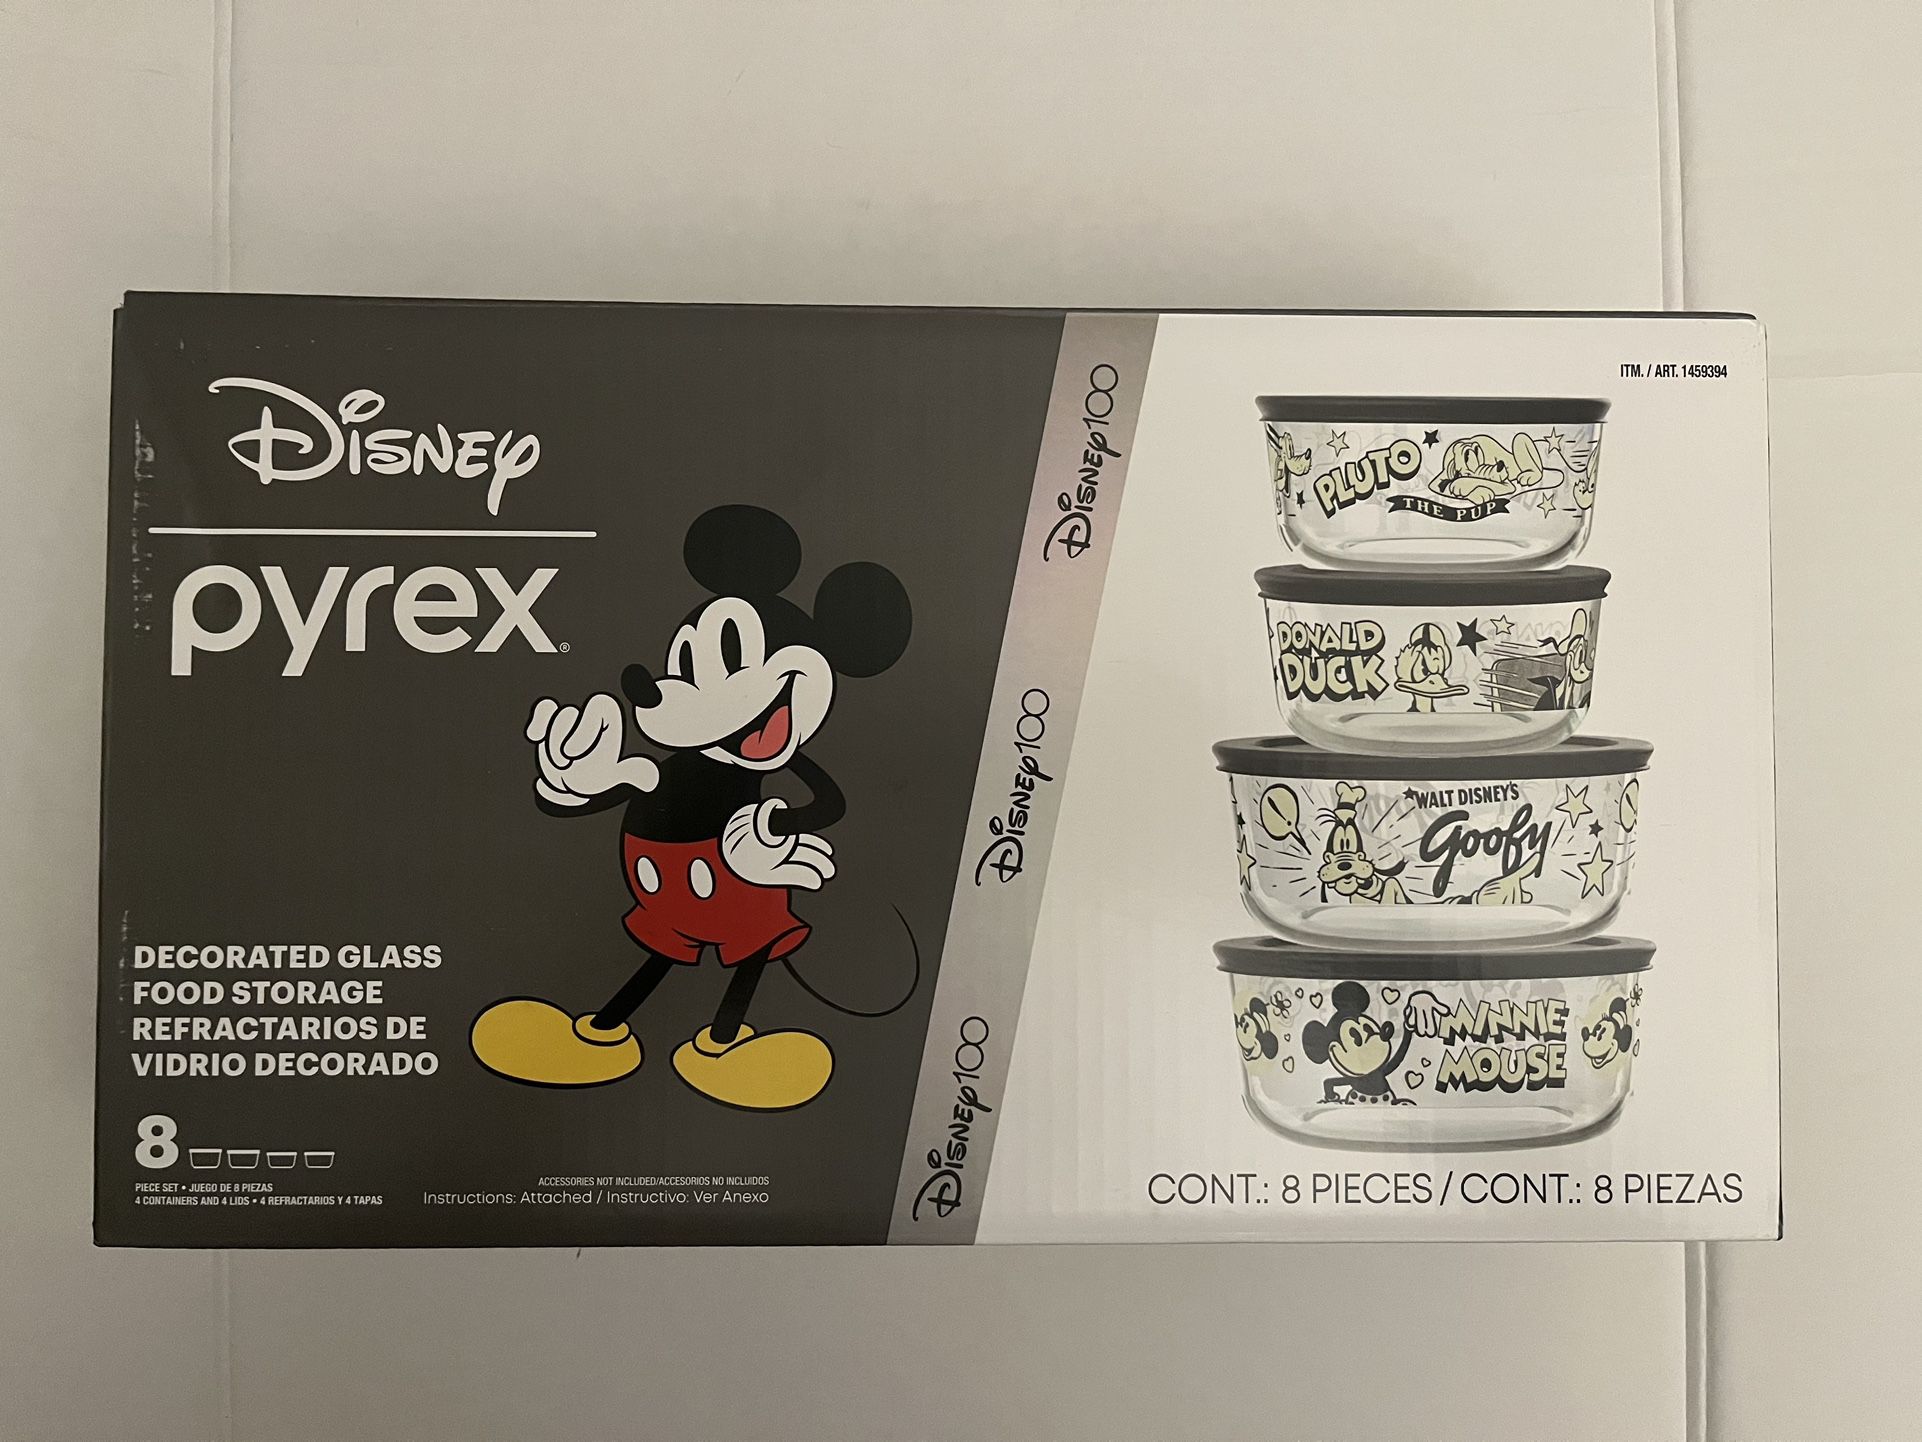 PyrexLimited Edition Disney 100 Years 6 Pc Set – Instant Brands